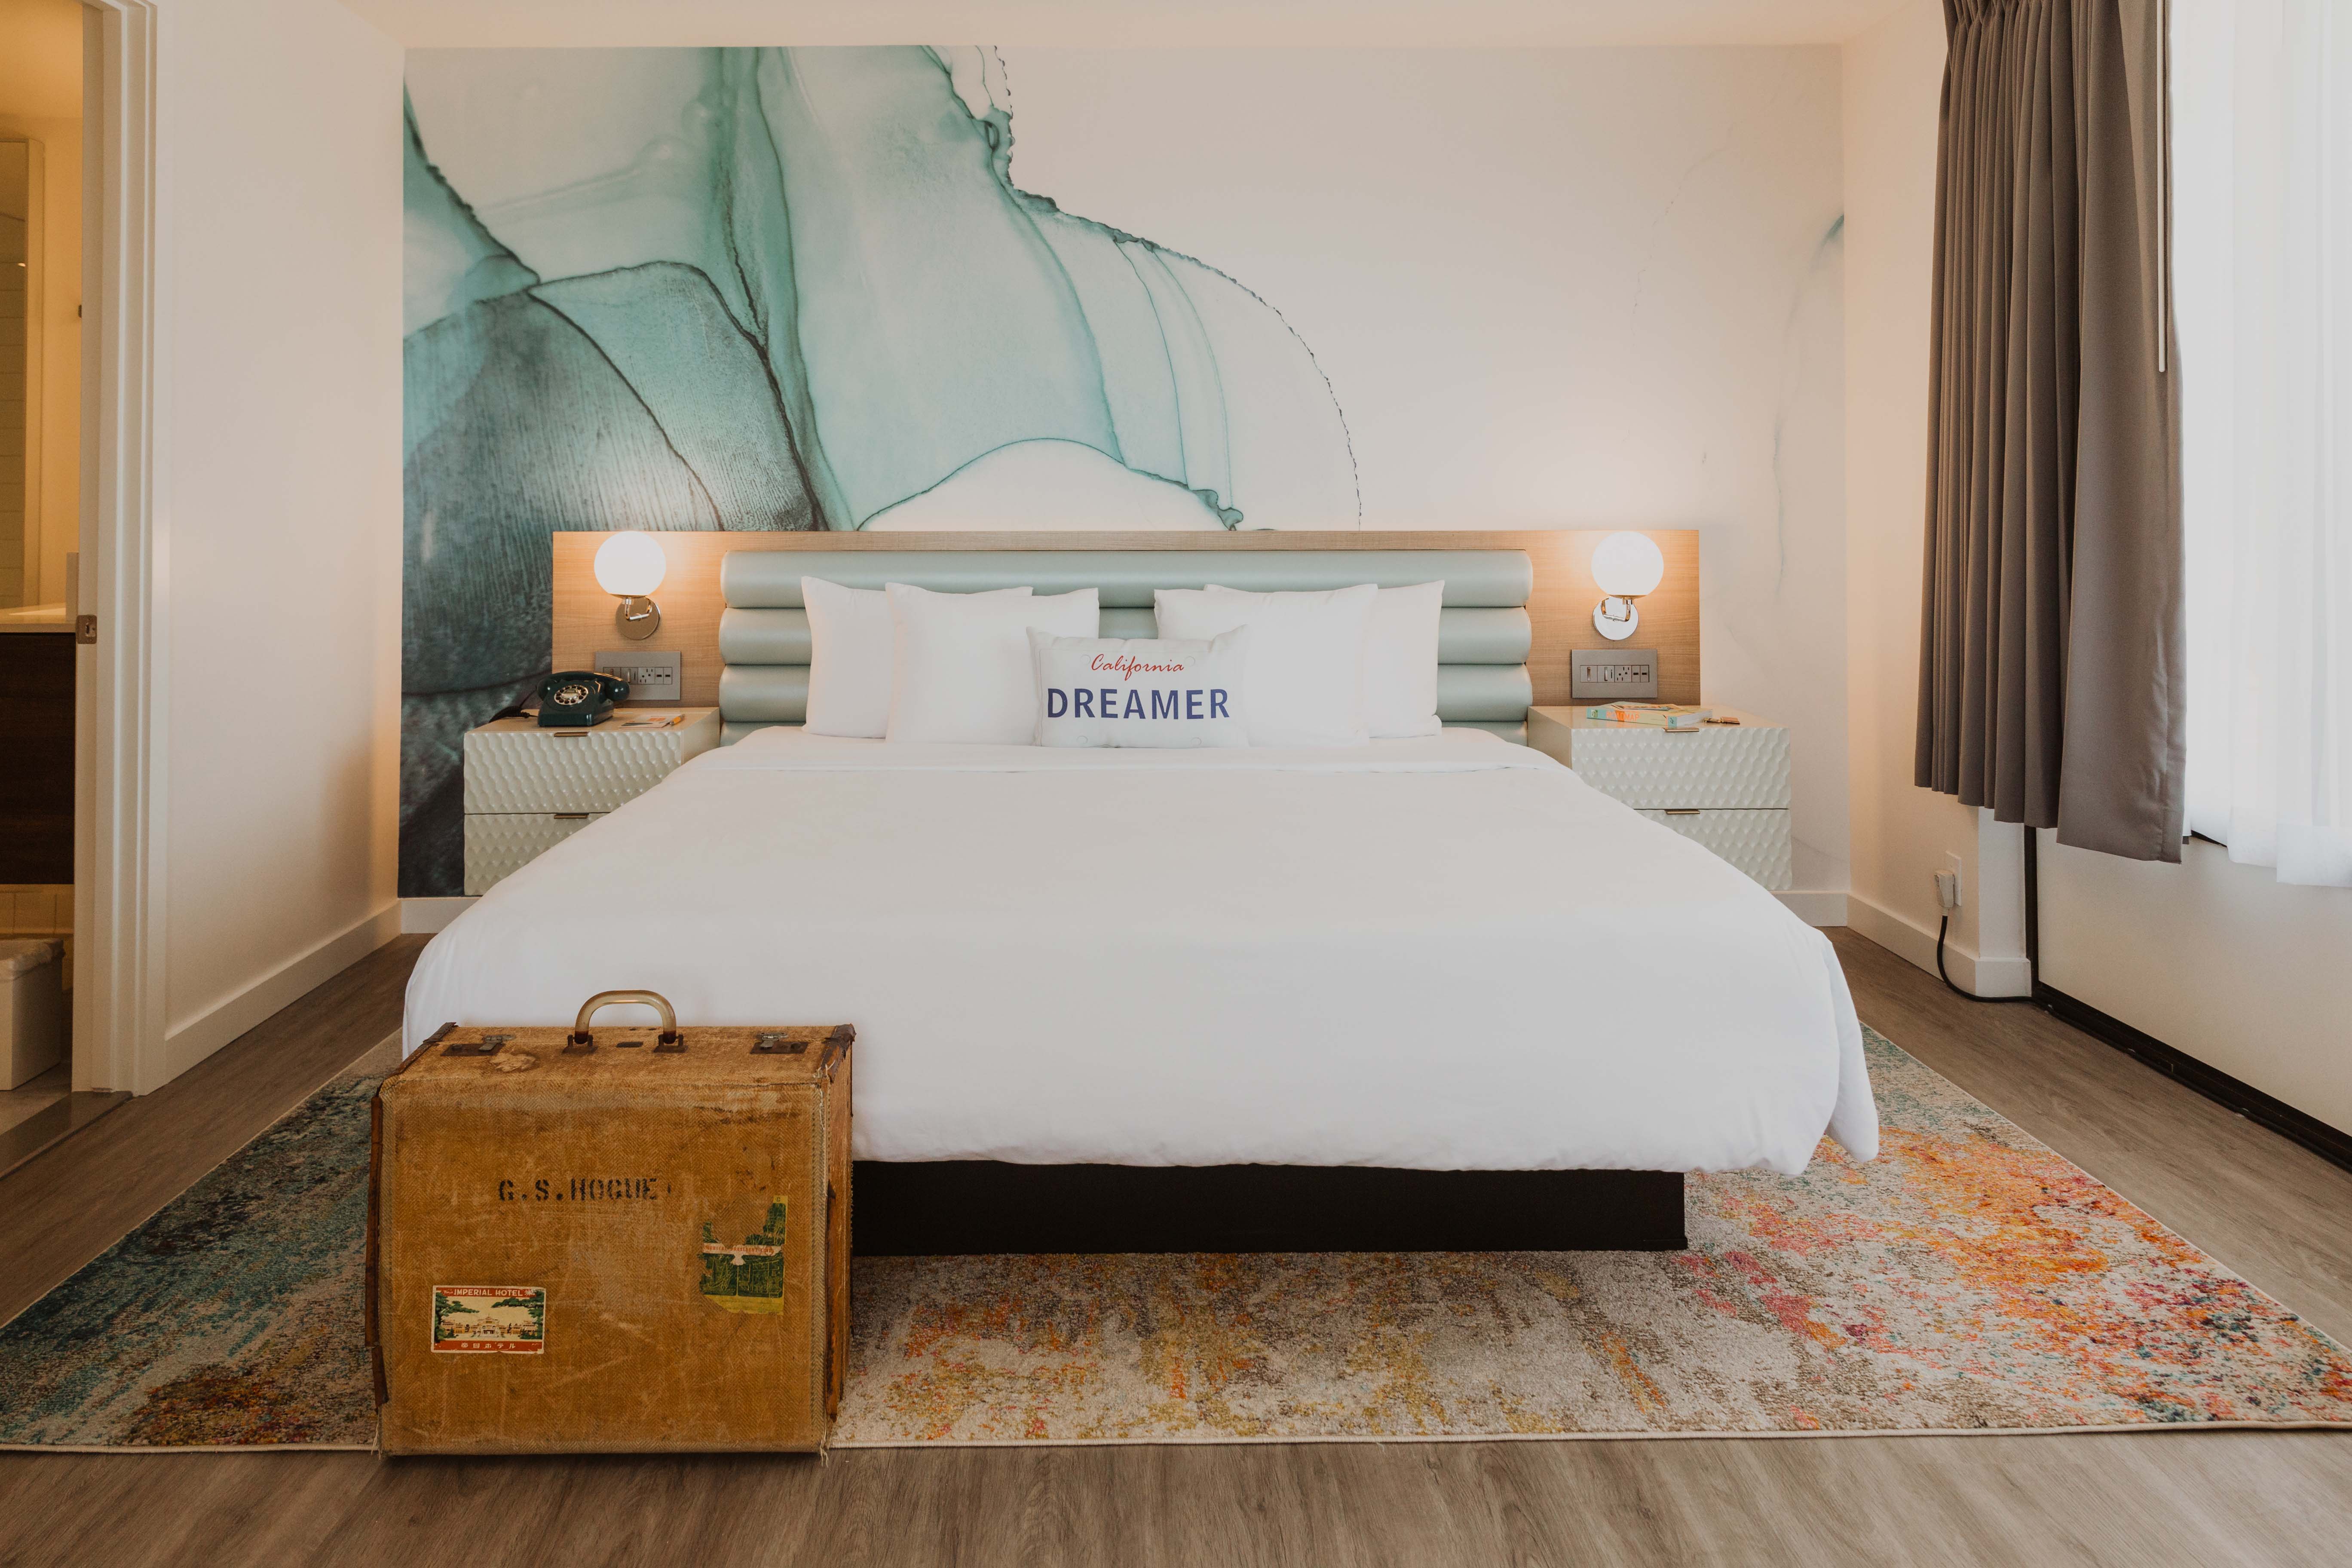 Bed in Rambler suite with Dreamer pillow and blue water color graphic behind the headboard